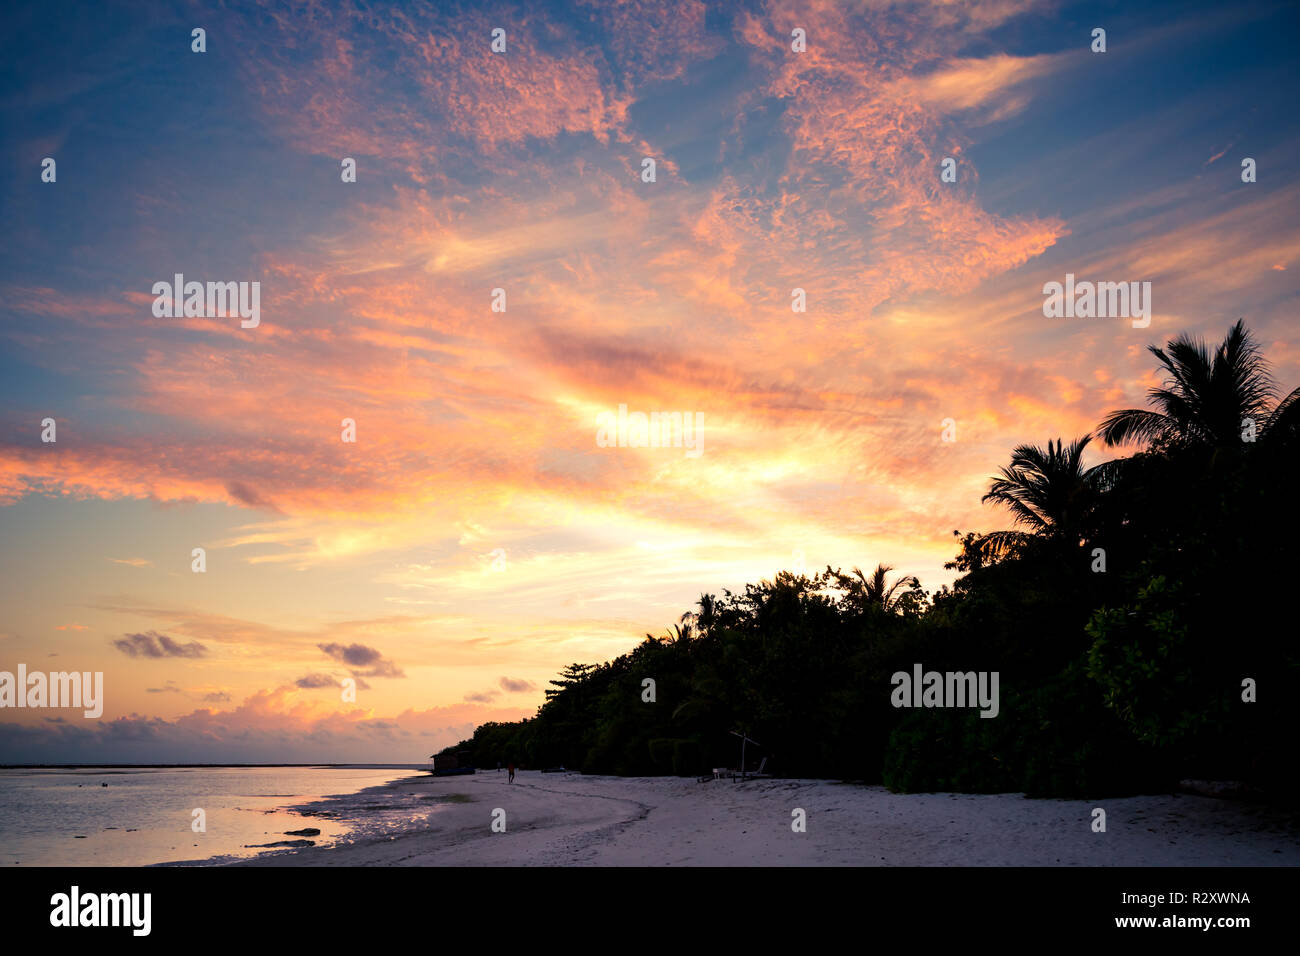 Sunset sunrise beach landscape. Amazing colors sky and calm sea water with palm trees over tranquil beach Stock Photo